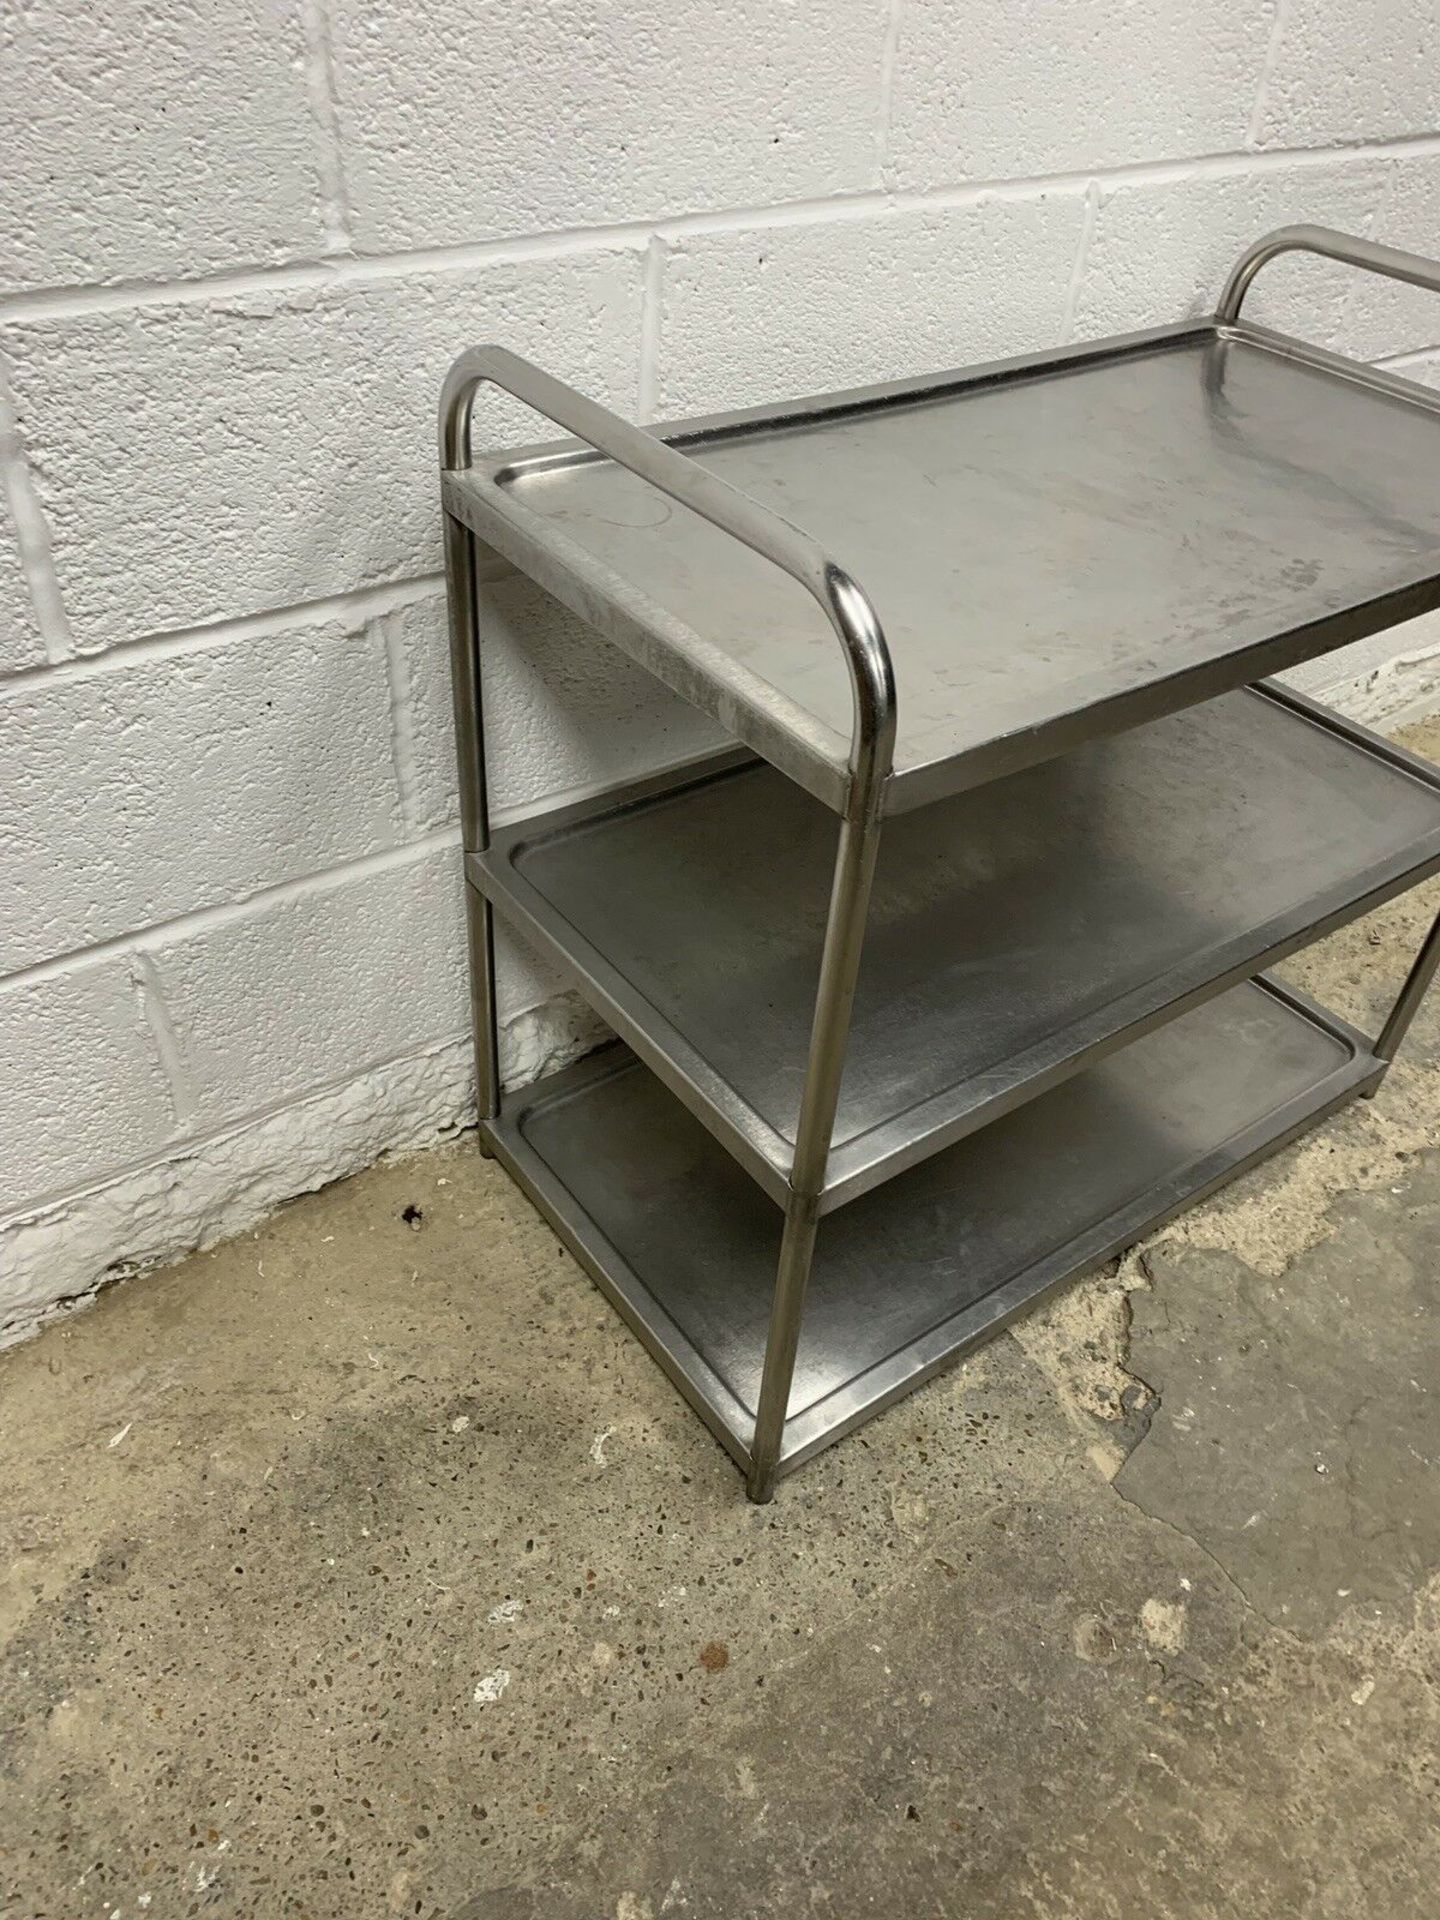 3 Tier Stainless Steel Trolley - Image 2 of 3